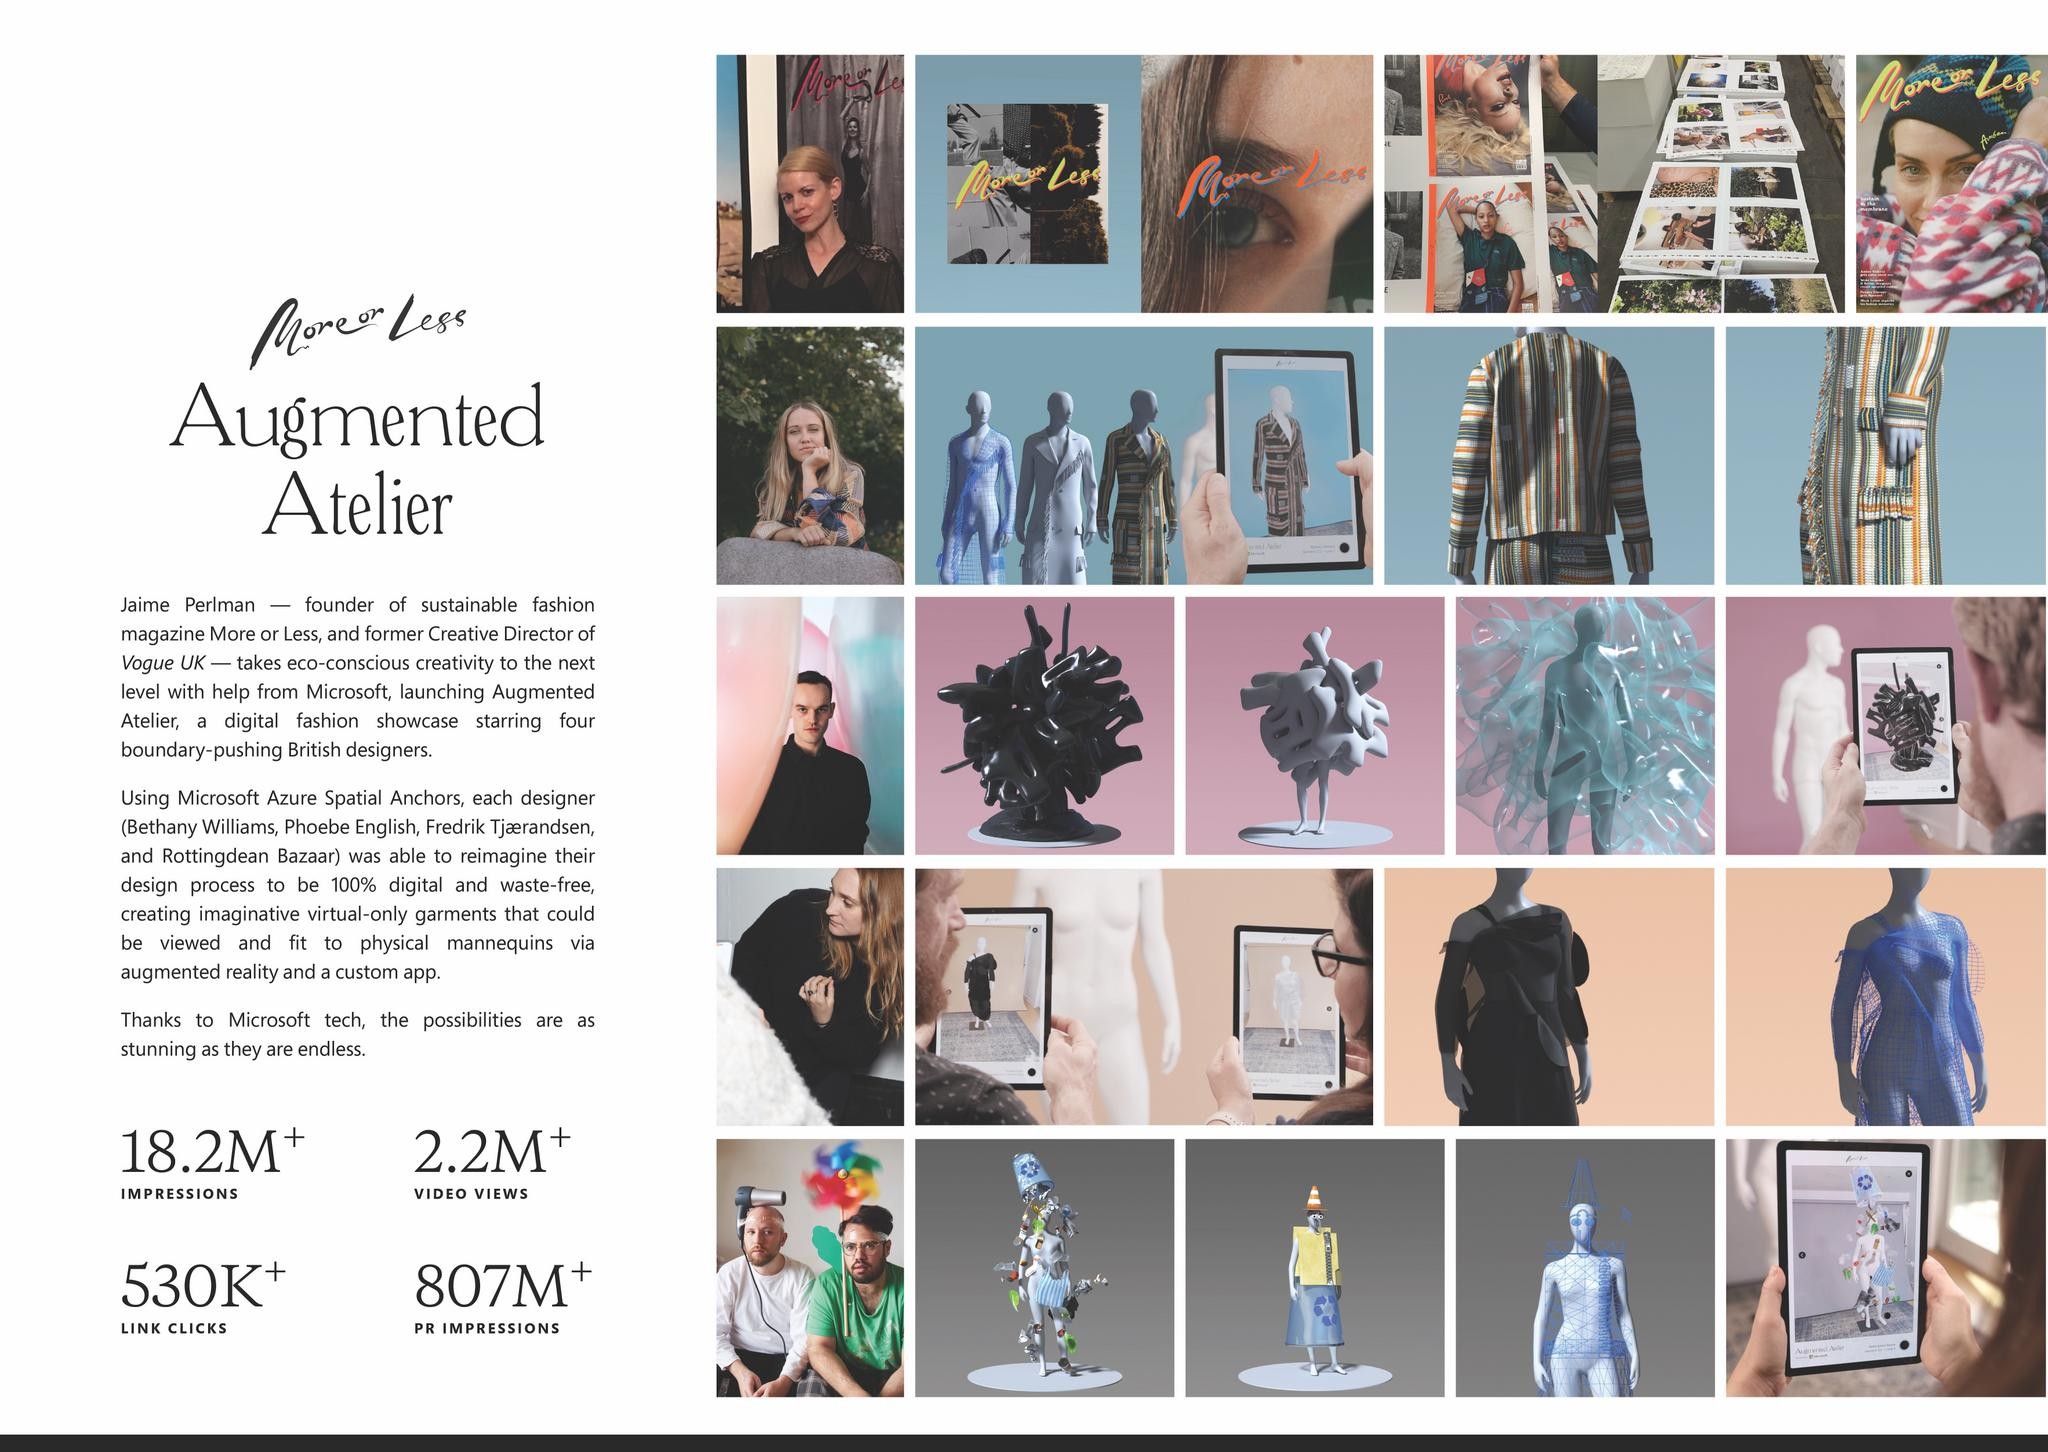 Augmented Atelier by More or Less magazine